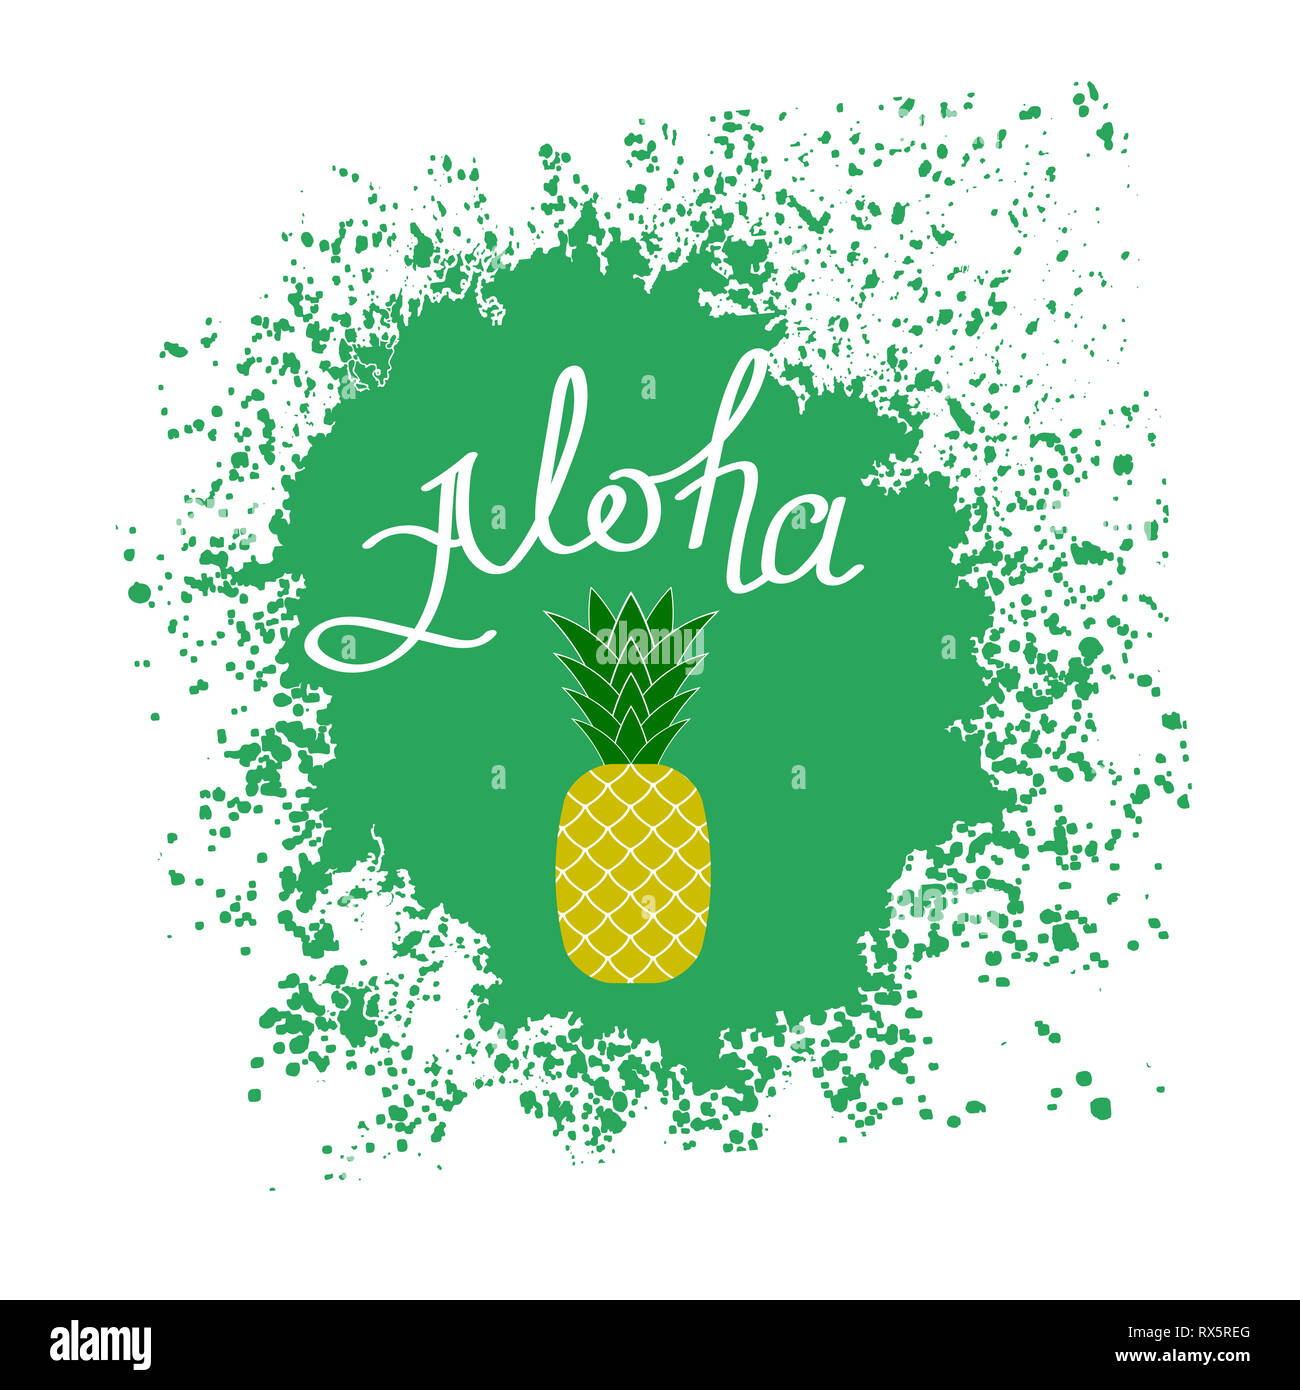 Lettering AlohaText with Pineapple. Hand Sketched Aloha Typography Sign Stock Photo